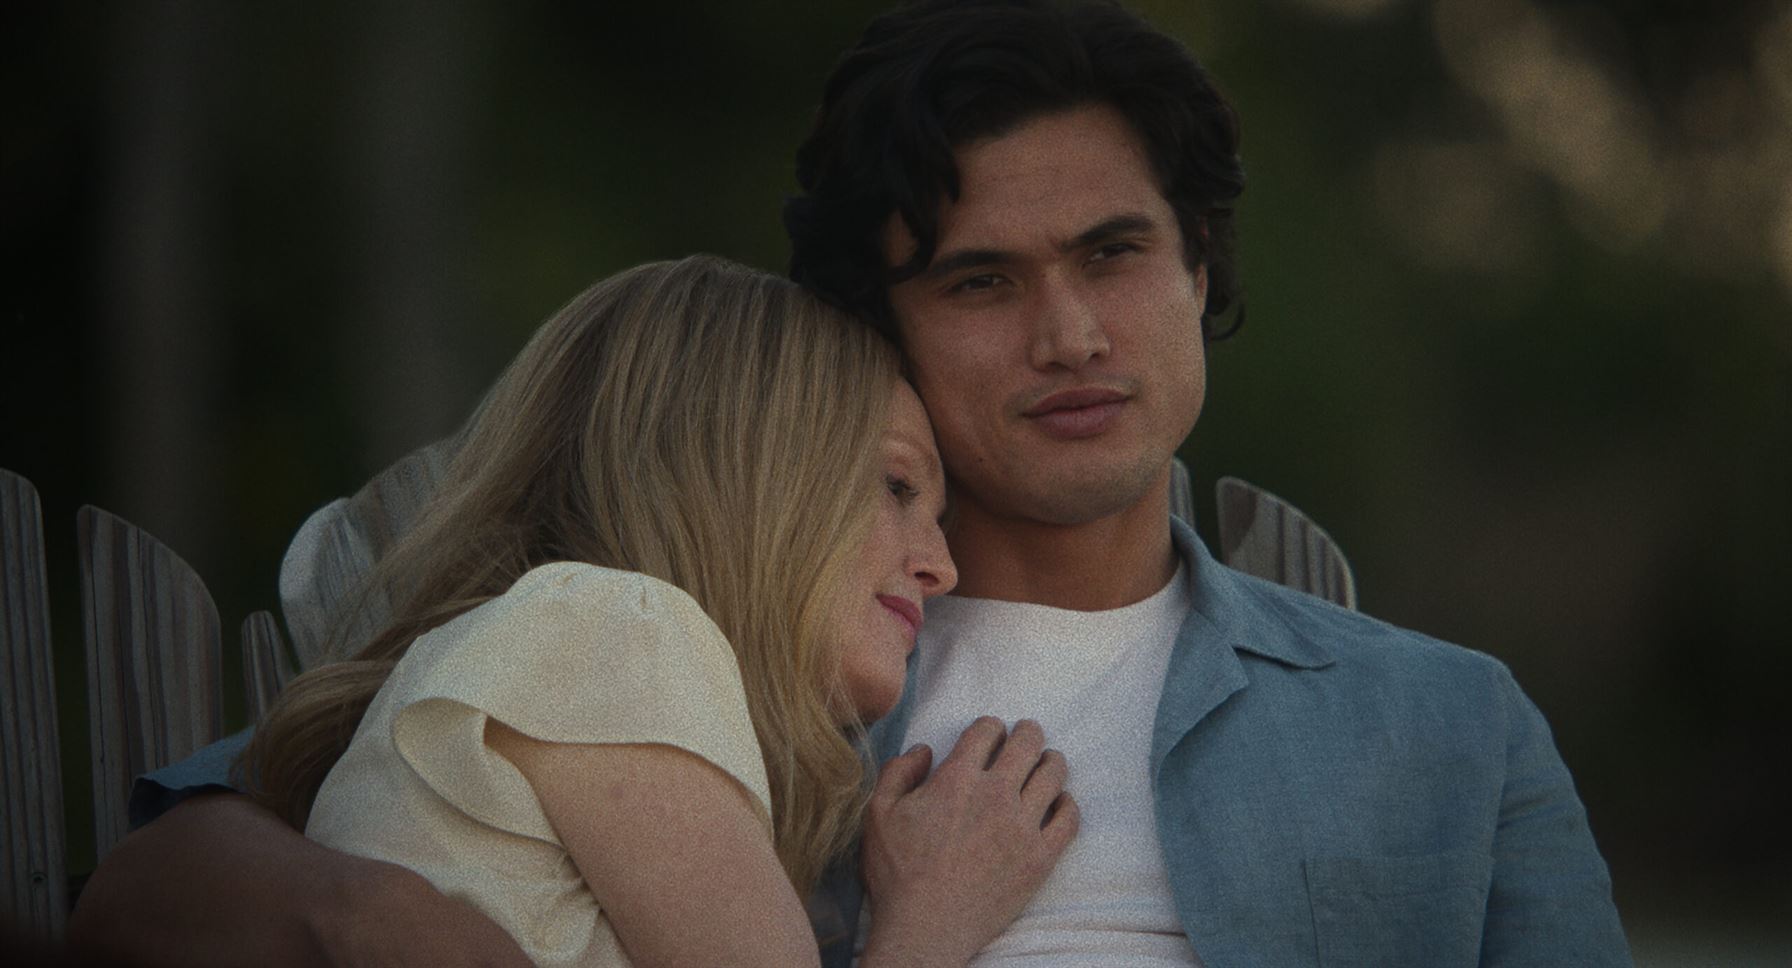 Julianne Moore (left) and Charles Melton (right) play characters loosely inspired by a real-life criminal case. Photo courtesy of Netflix